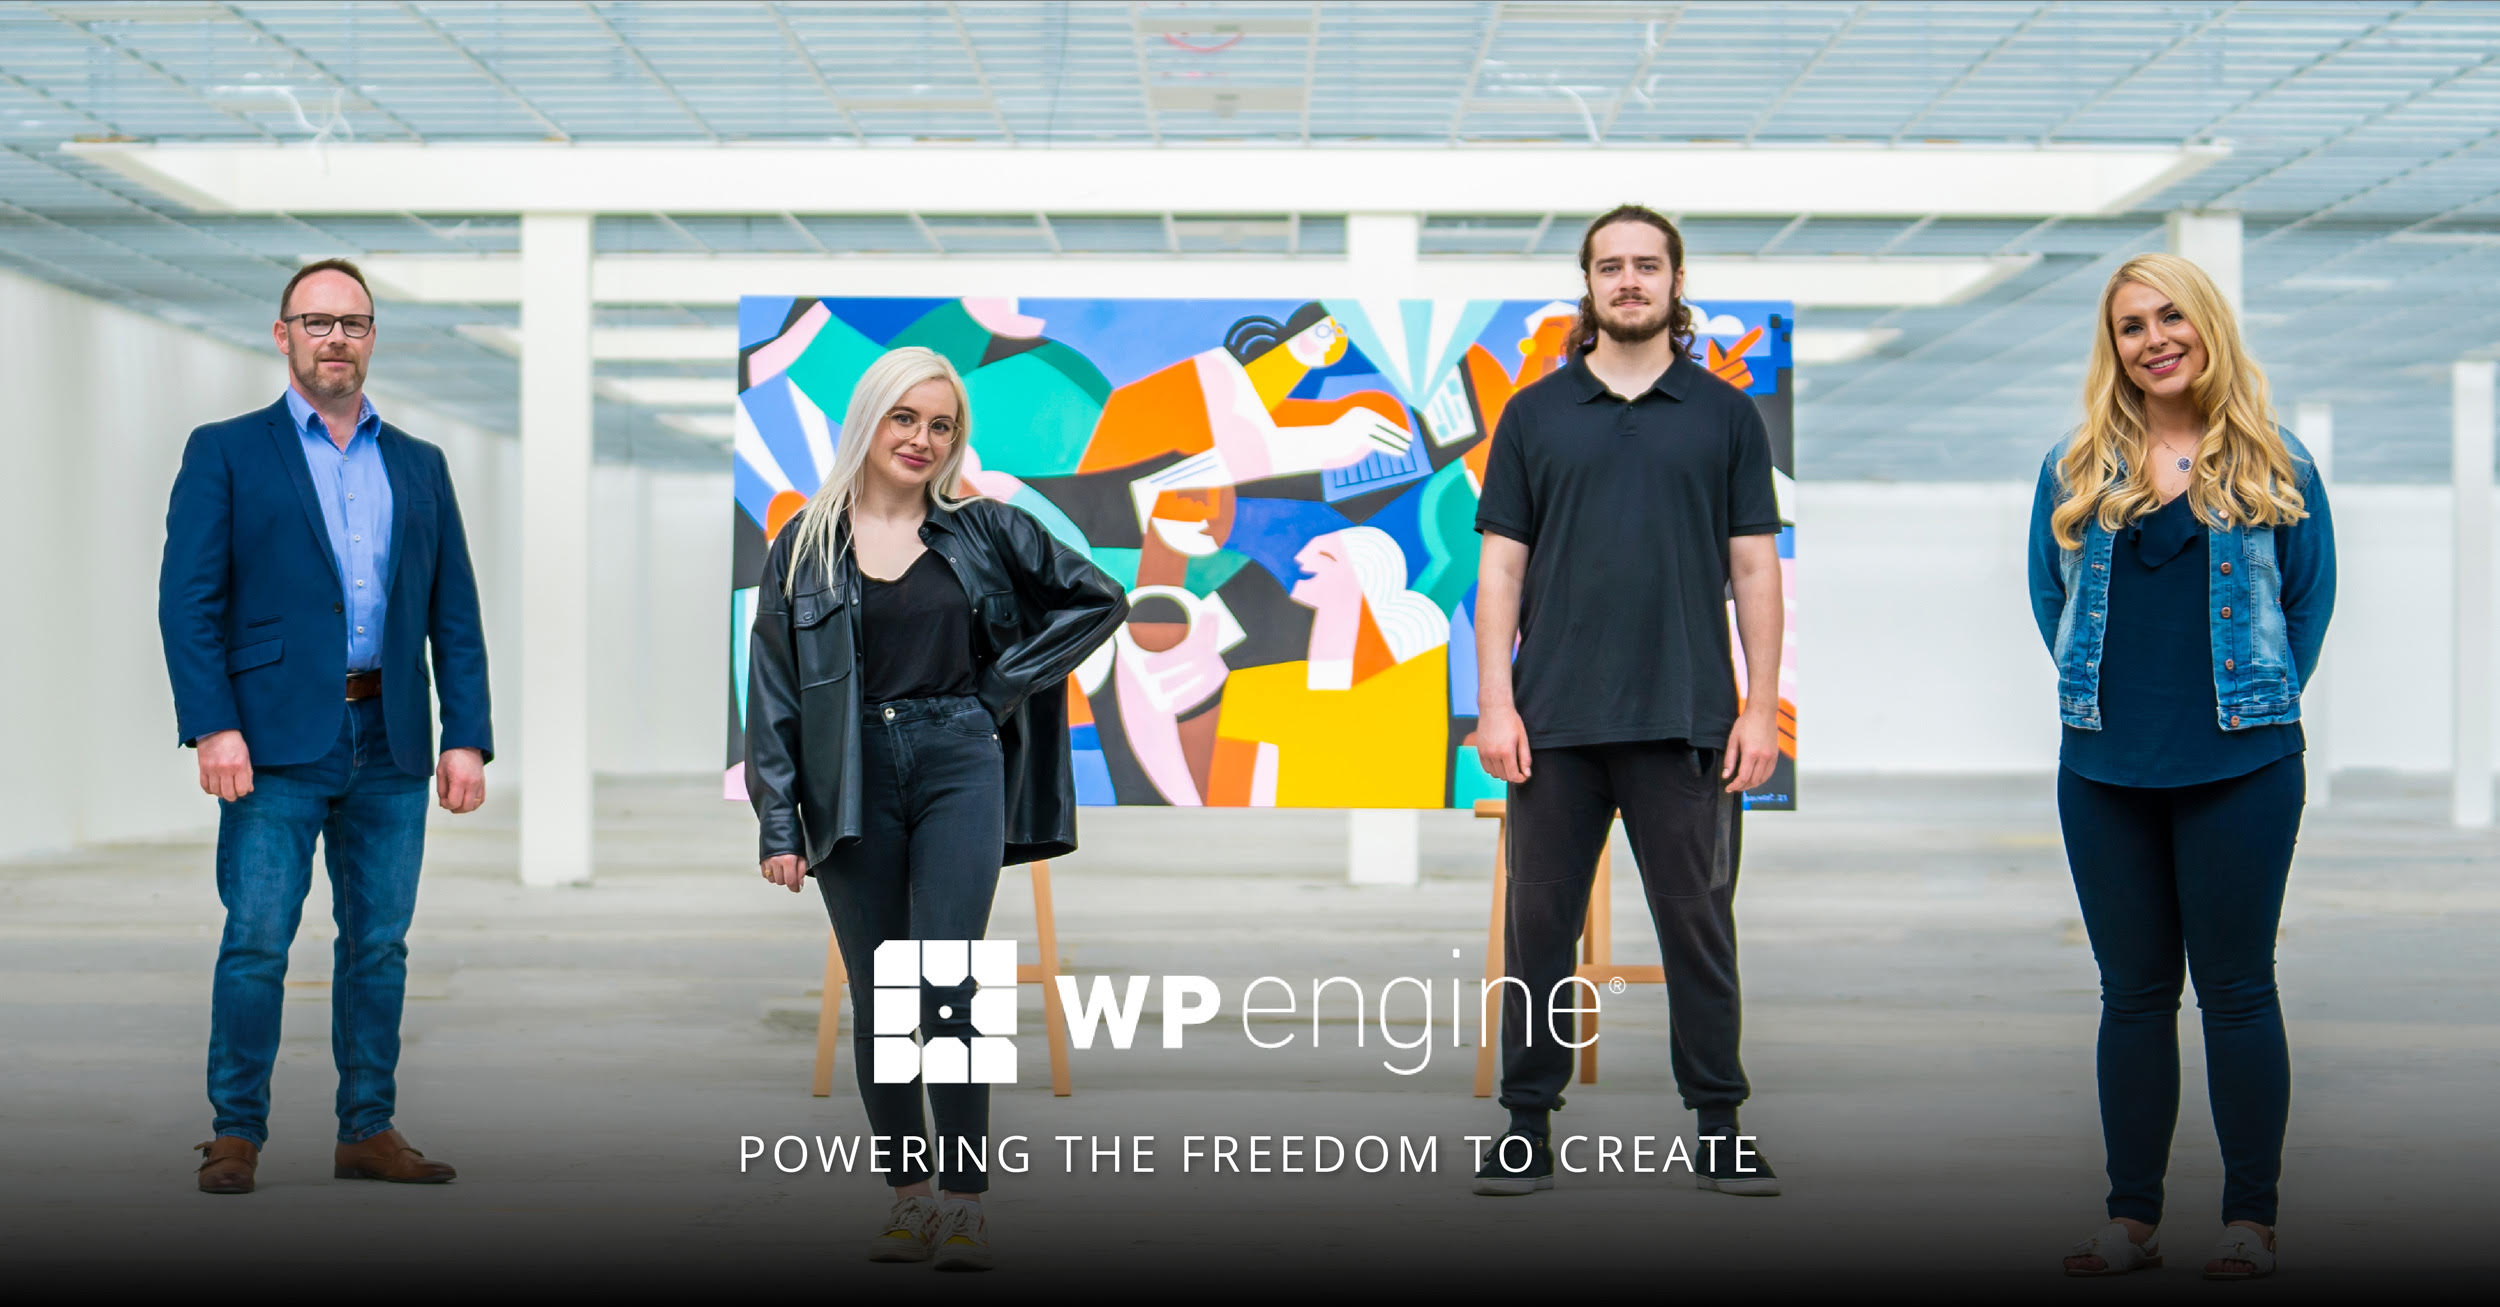 Gold MUSE Award 2022 Gold MUSE Award 2022 - Pictured above is the award-winning employer brand campaign, “Powering the Freedom to Create” for WP Engine